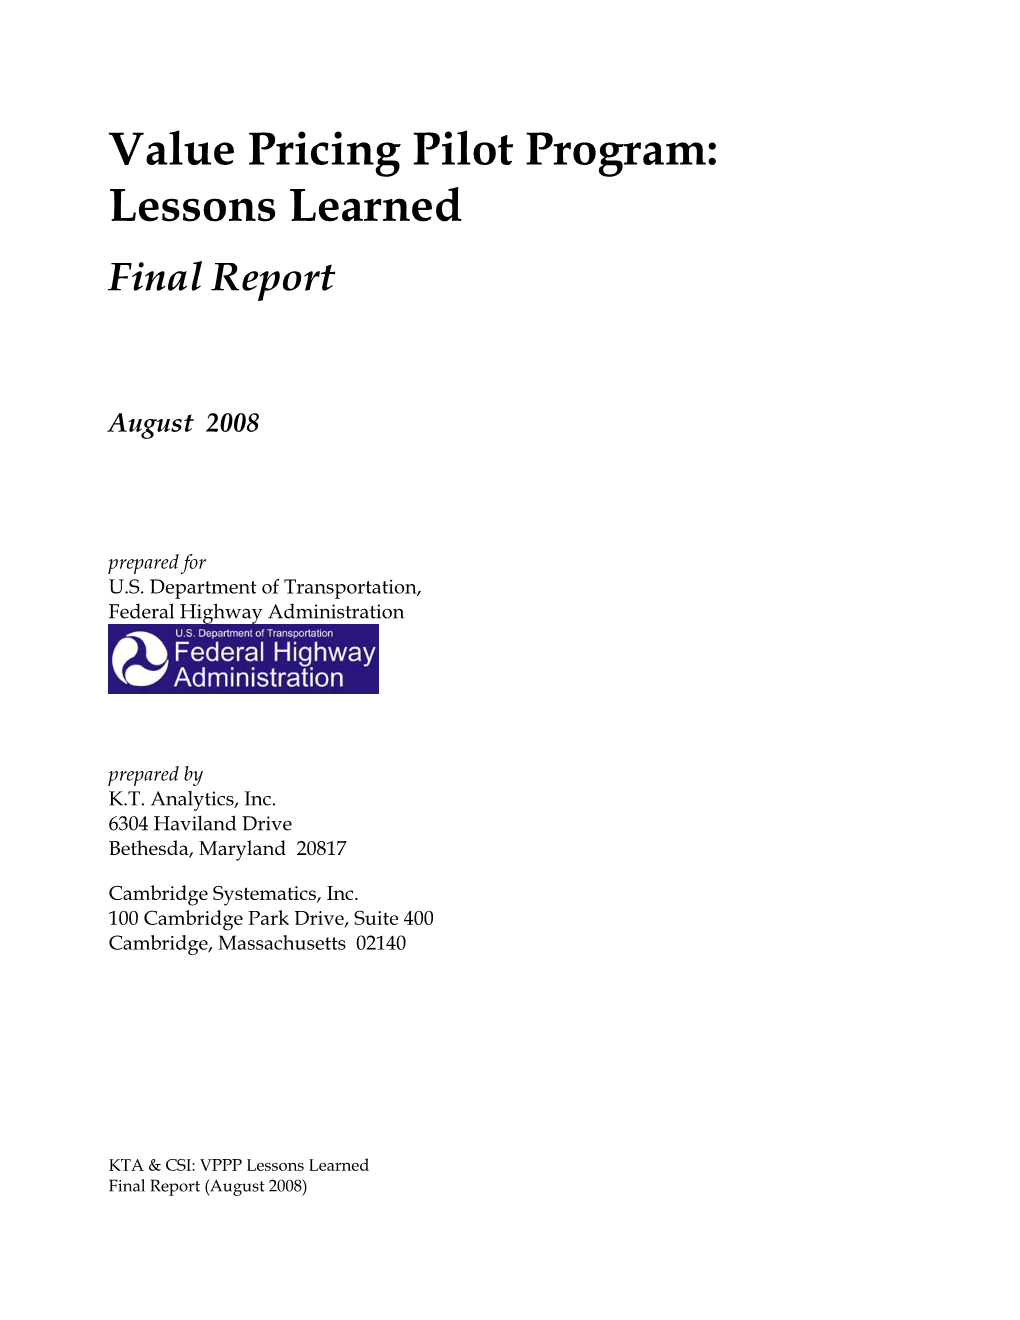 Value Pricing Pilot Program: Lessons Learned Final Report